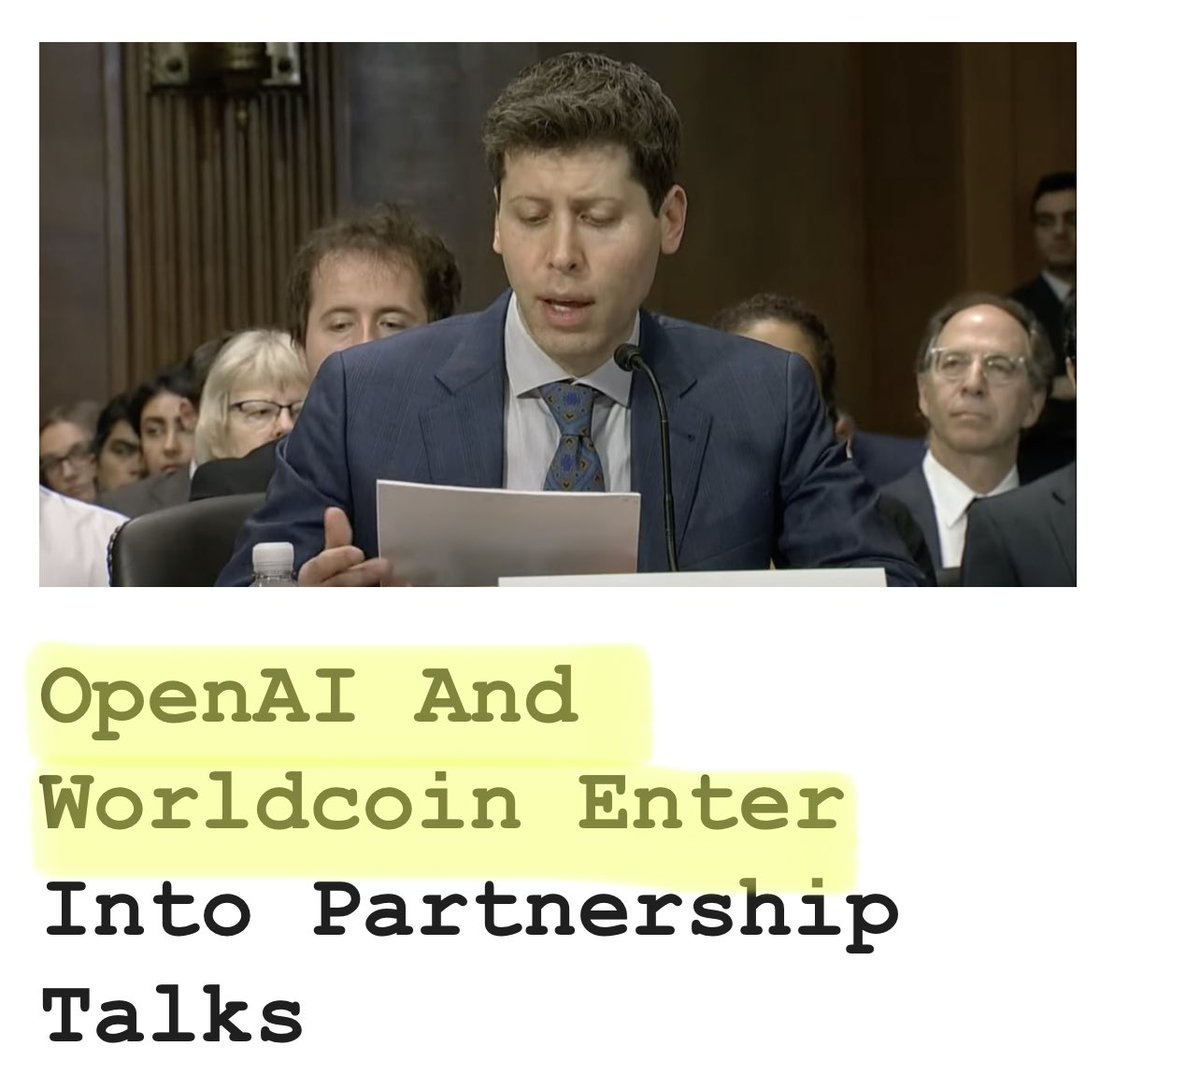 🚨 JUST IN: OpenAI & Worldcoin Have Entered Partnership Discussion !!👀🚨 OpenAI and Worldcoin are in talks for a groundbreaking partnership. Led by tech titan Sam Altman, this collaboration promises AI innovation for Worldcoin's universal basic income initiative, but with U.S.…